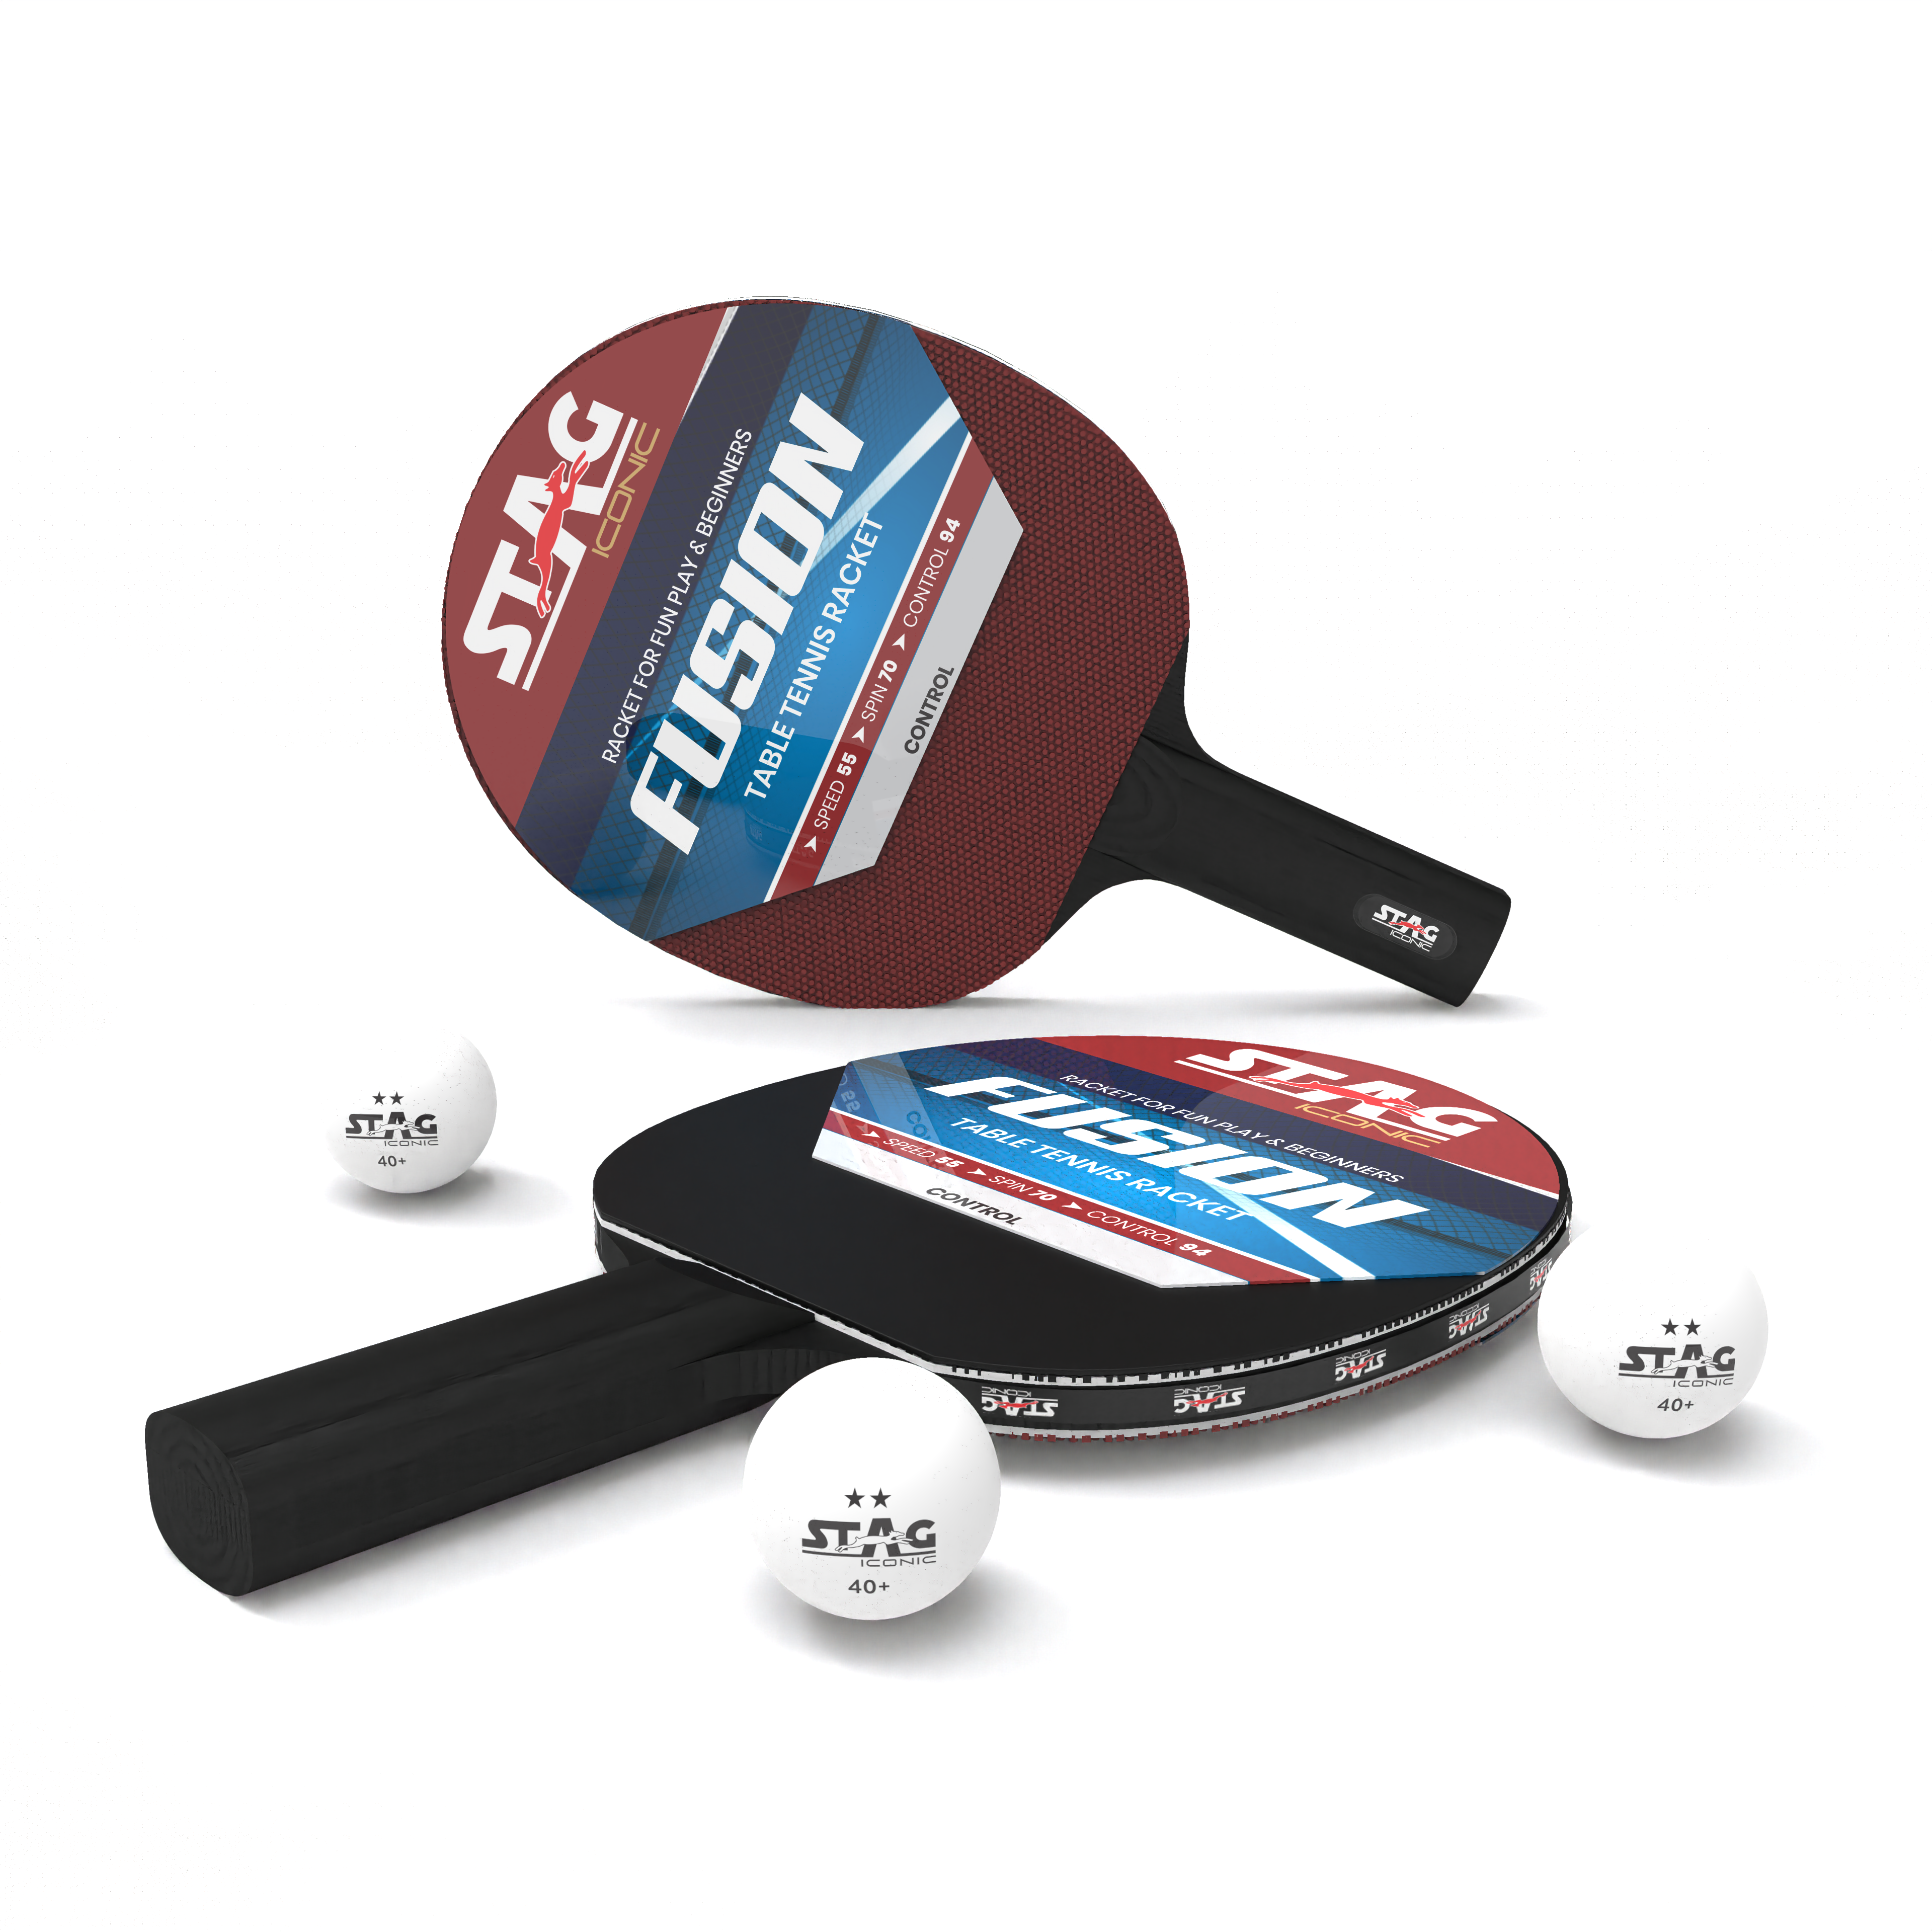 Stag Iconic New 2024 Fusion Series Table Tennis |Beginner Play Series | Spring into Action with Vibrant, Playful Ping-Pop Colors| Discover Your Element in Table Tennis